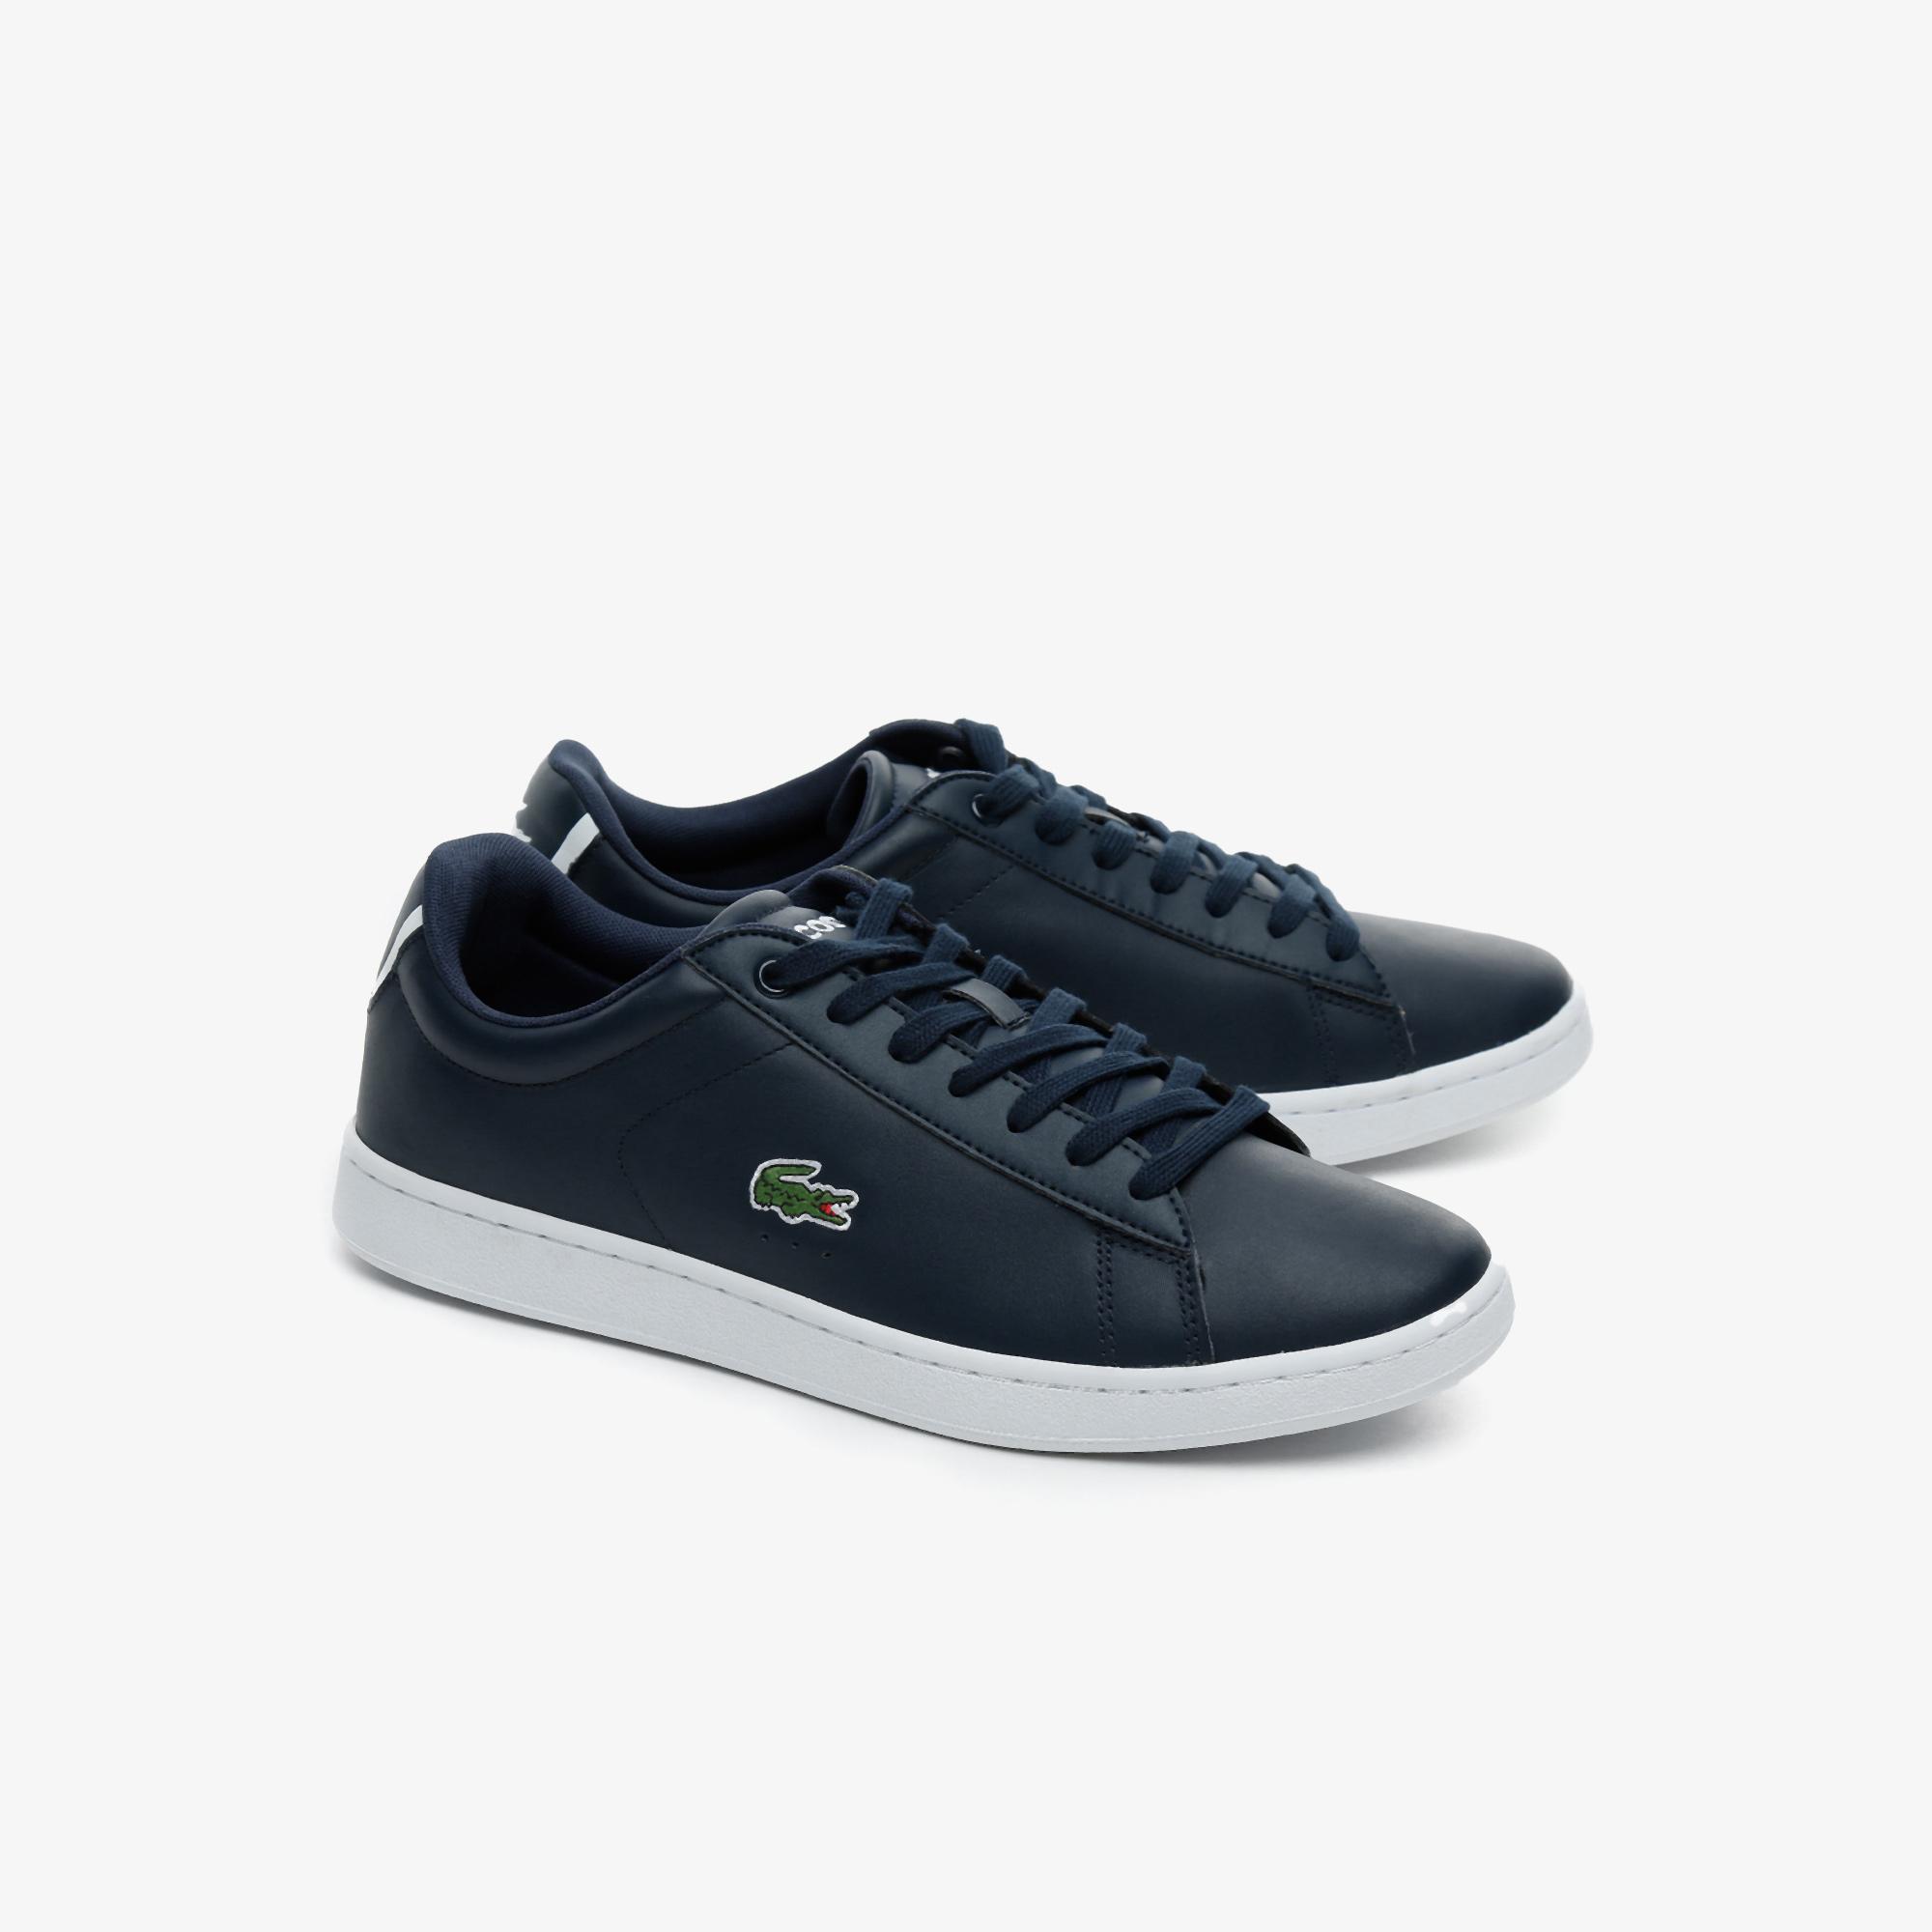 Lacoste Carnaby Evo BL 1 Men's Leather 